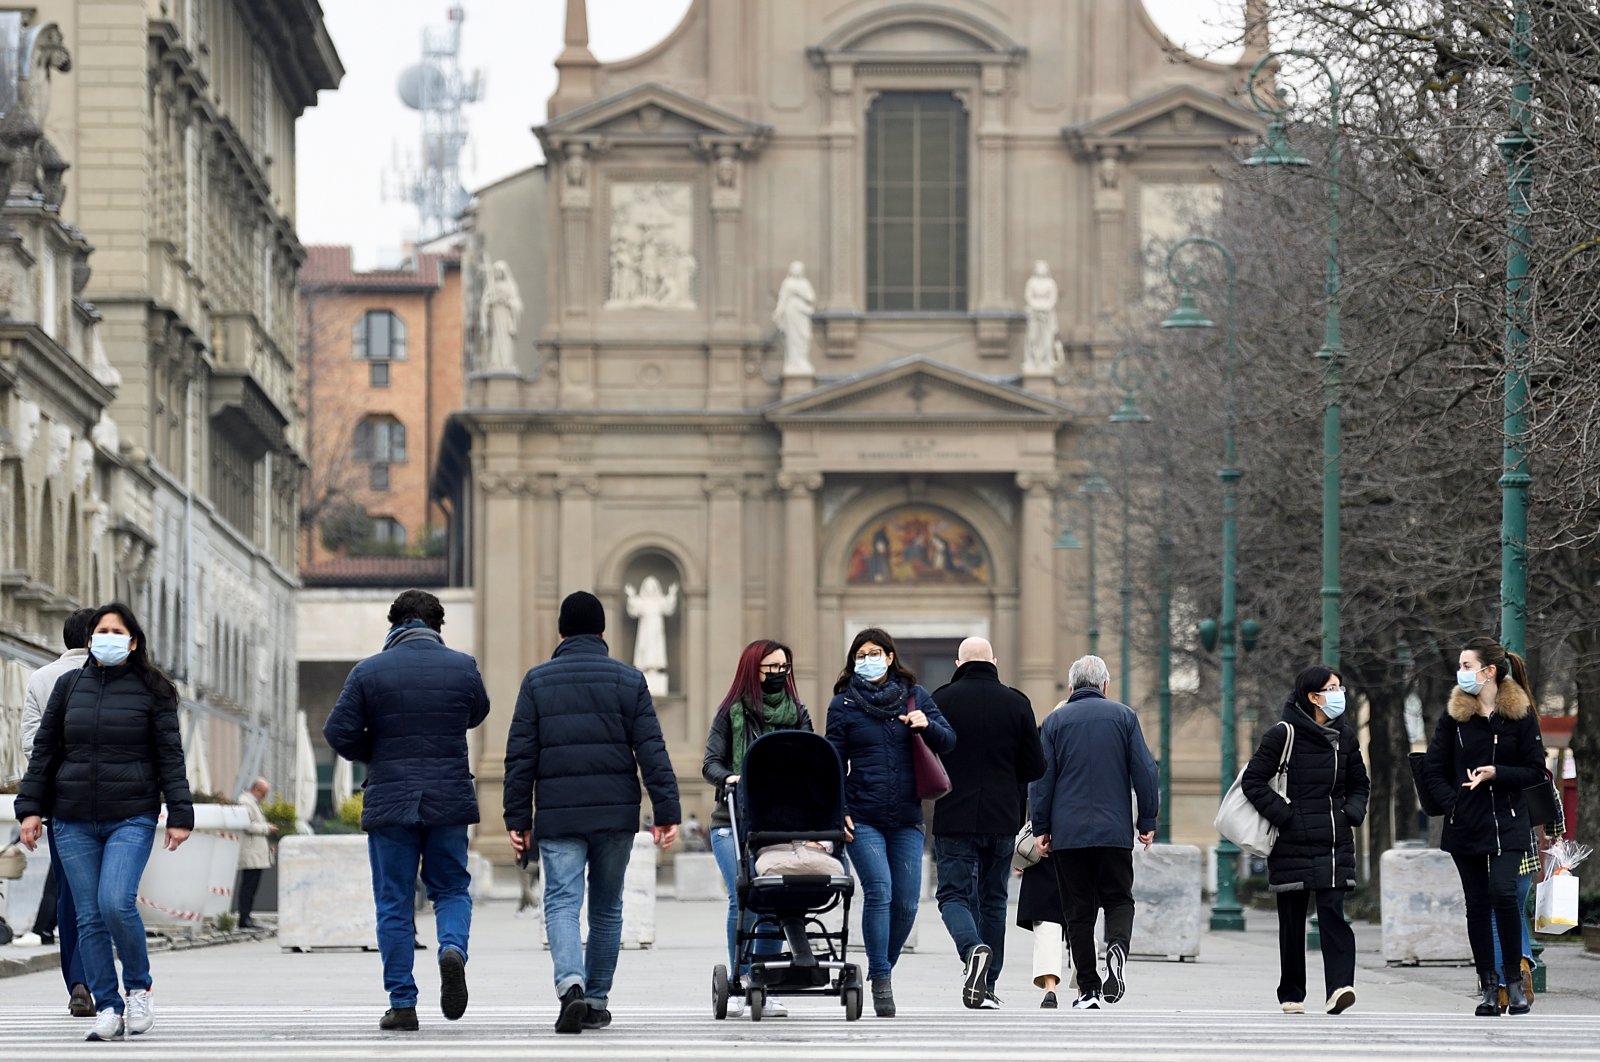 People walk on a street a year after the peak of Italy's coronavirus outbreak, in Bergamo, the country's epicenter, Italy, March 3, 2021. (Reuters Photo)